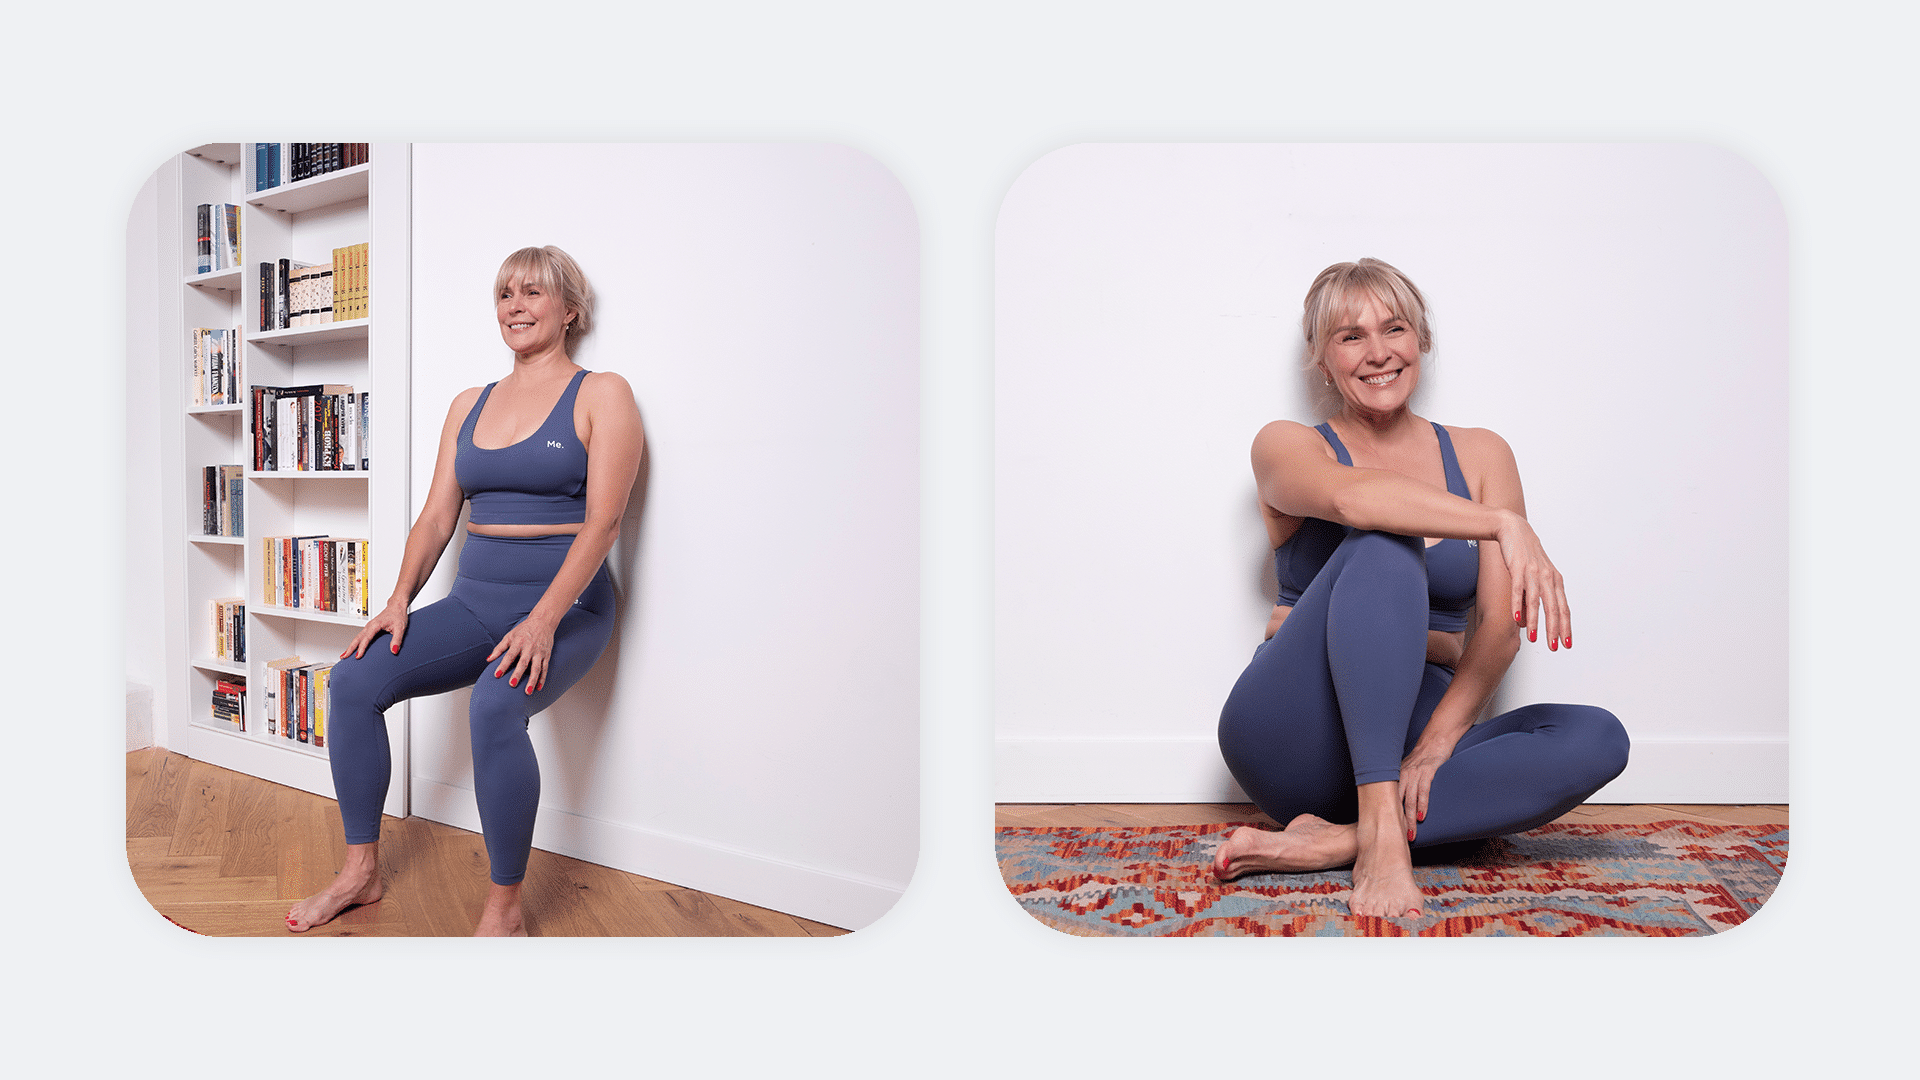 21 Day Pilates Wall Workout: Will It Work For Seniors - BetterMe